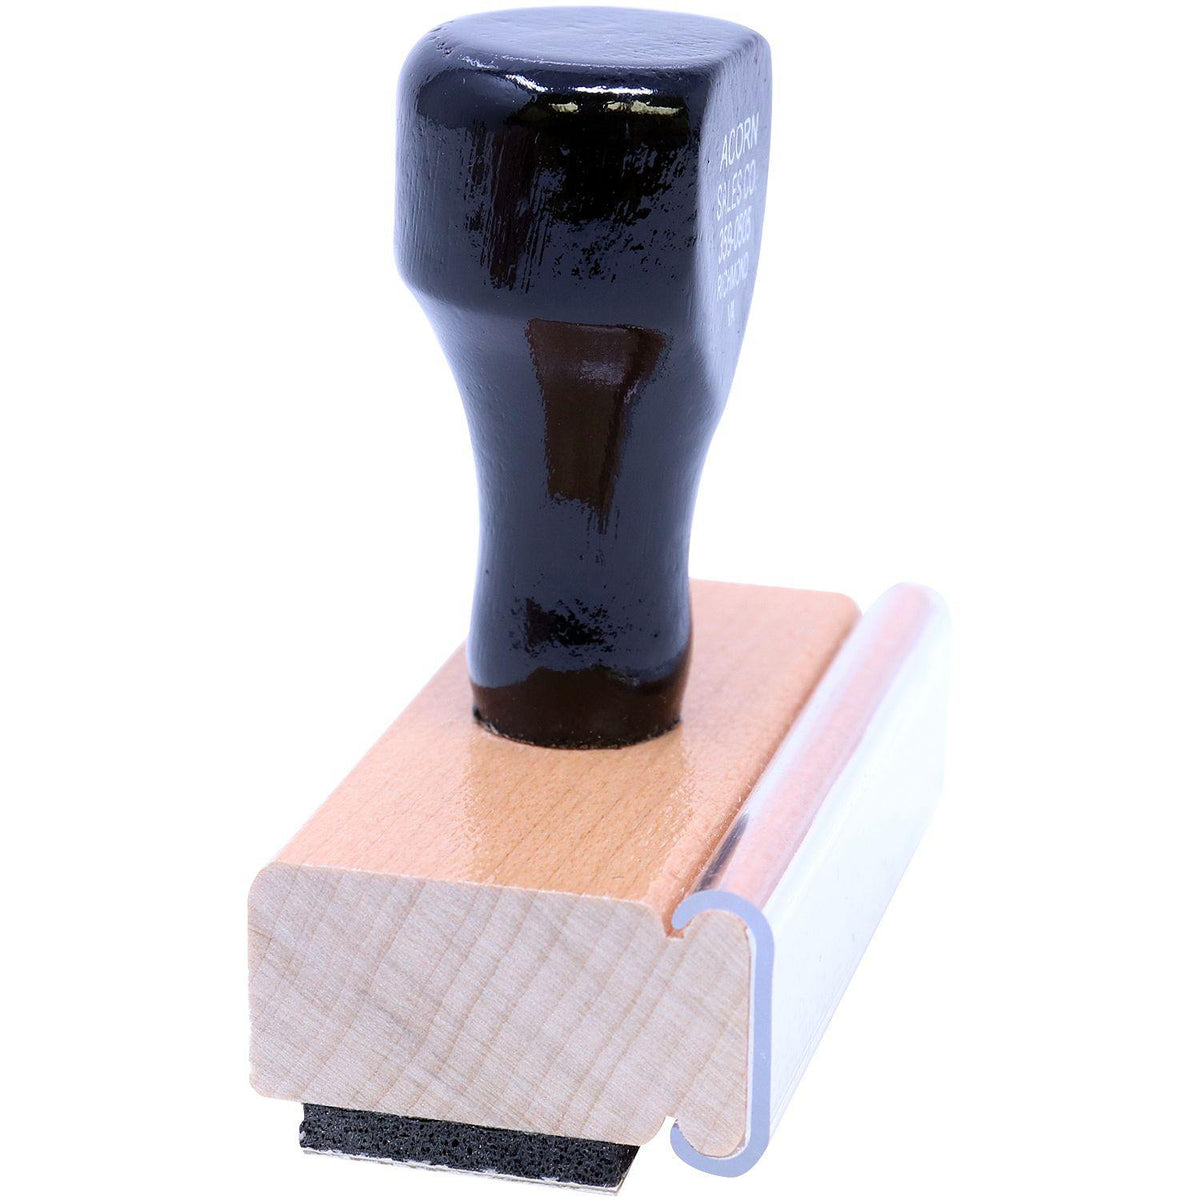 Side View of Wrong Bank Rubber Stamp at an Angle